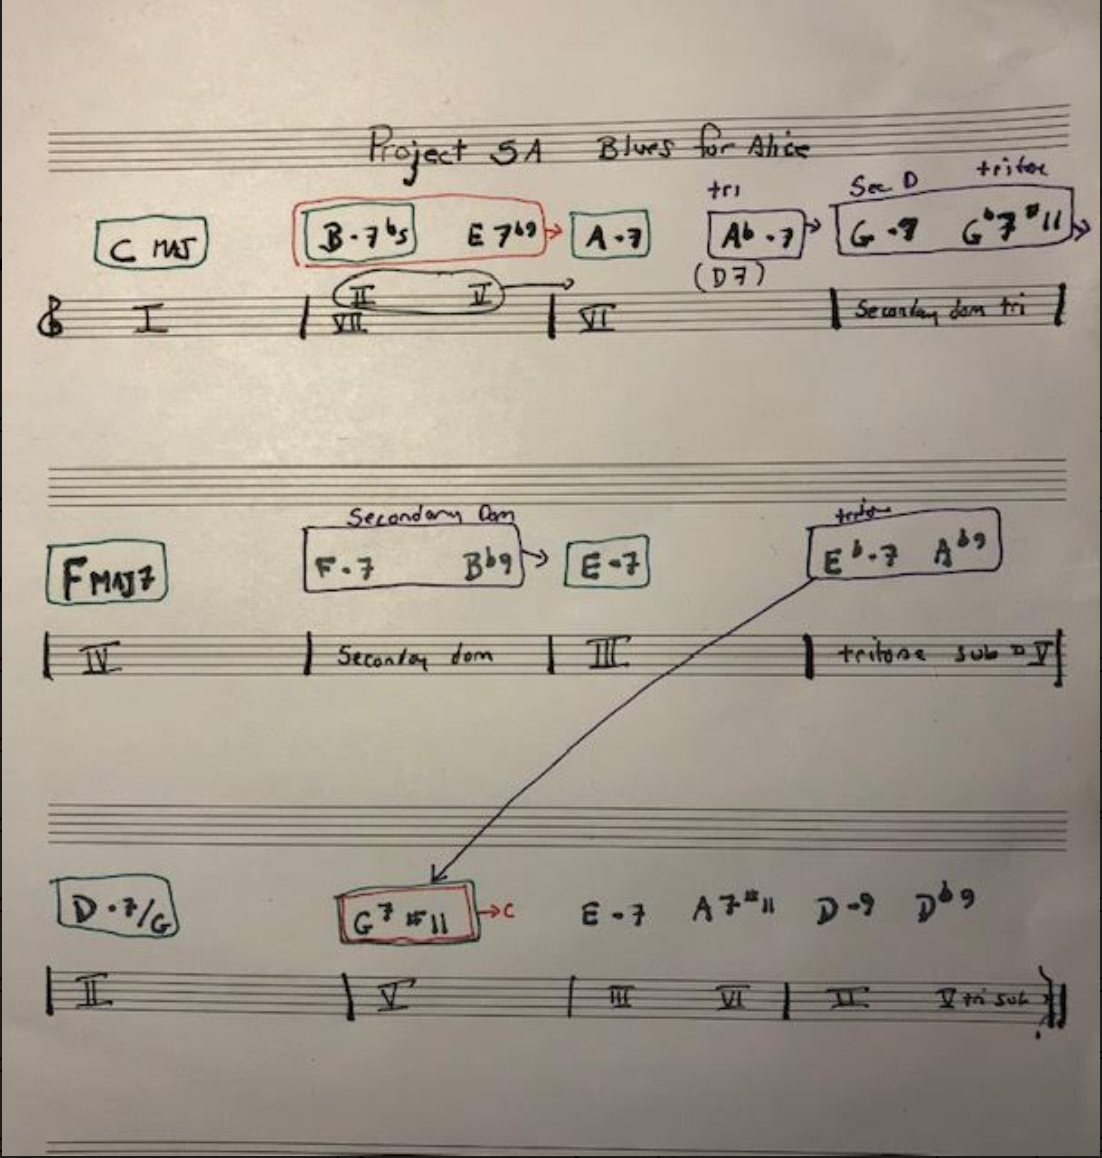 Howard Roberts Super Chops: study group for a tune based practice routine-screen-shot-2021-02-07-3-50-15-pm-png